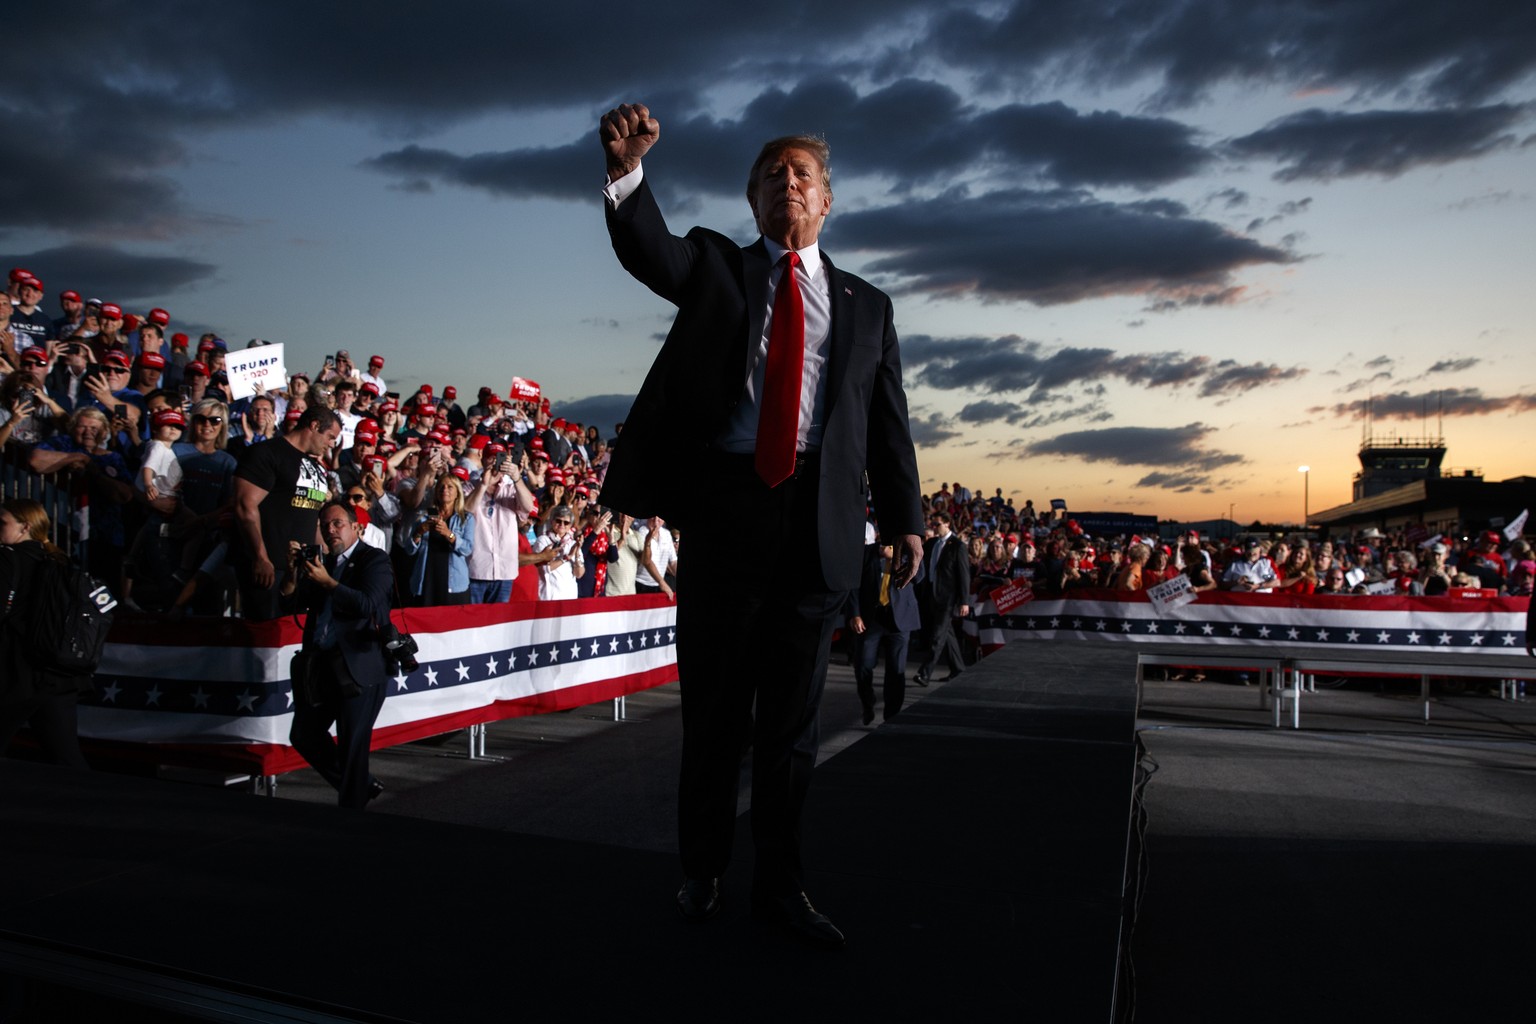 President Donald Trump pumps his fist to the crowd after speaking to a campaign rally in Montoursville, Pa., on May 20, 2019. (AP Photo/Evan Vucci)
Donald Trump